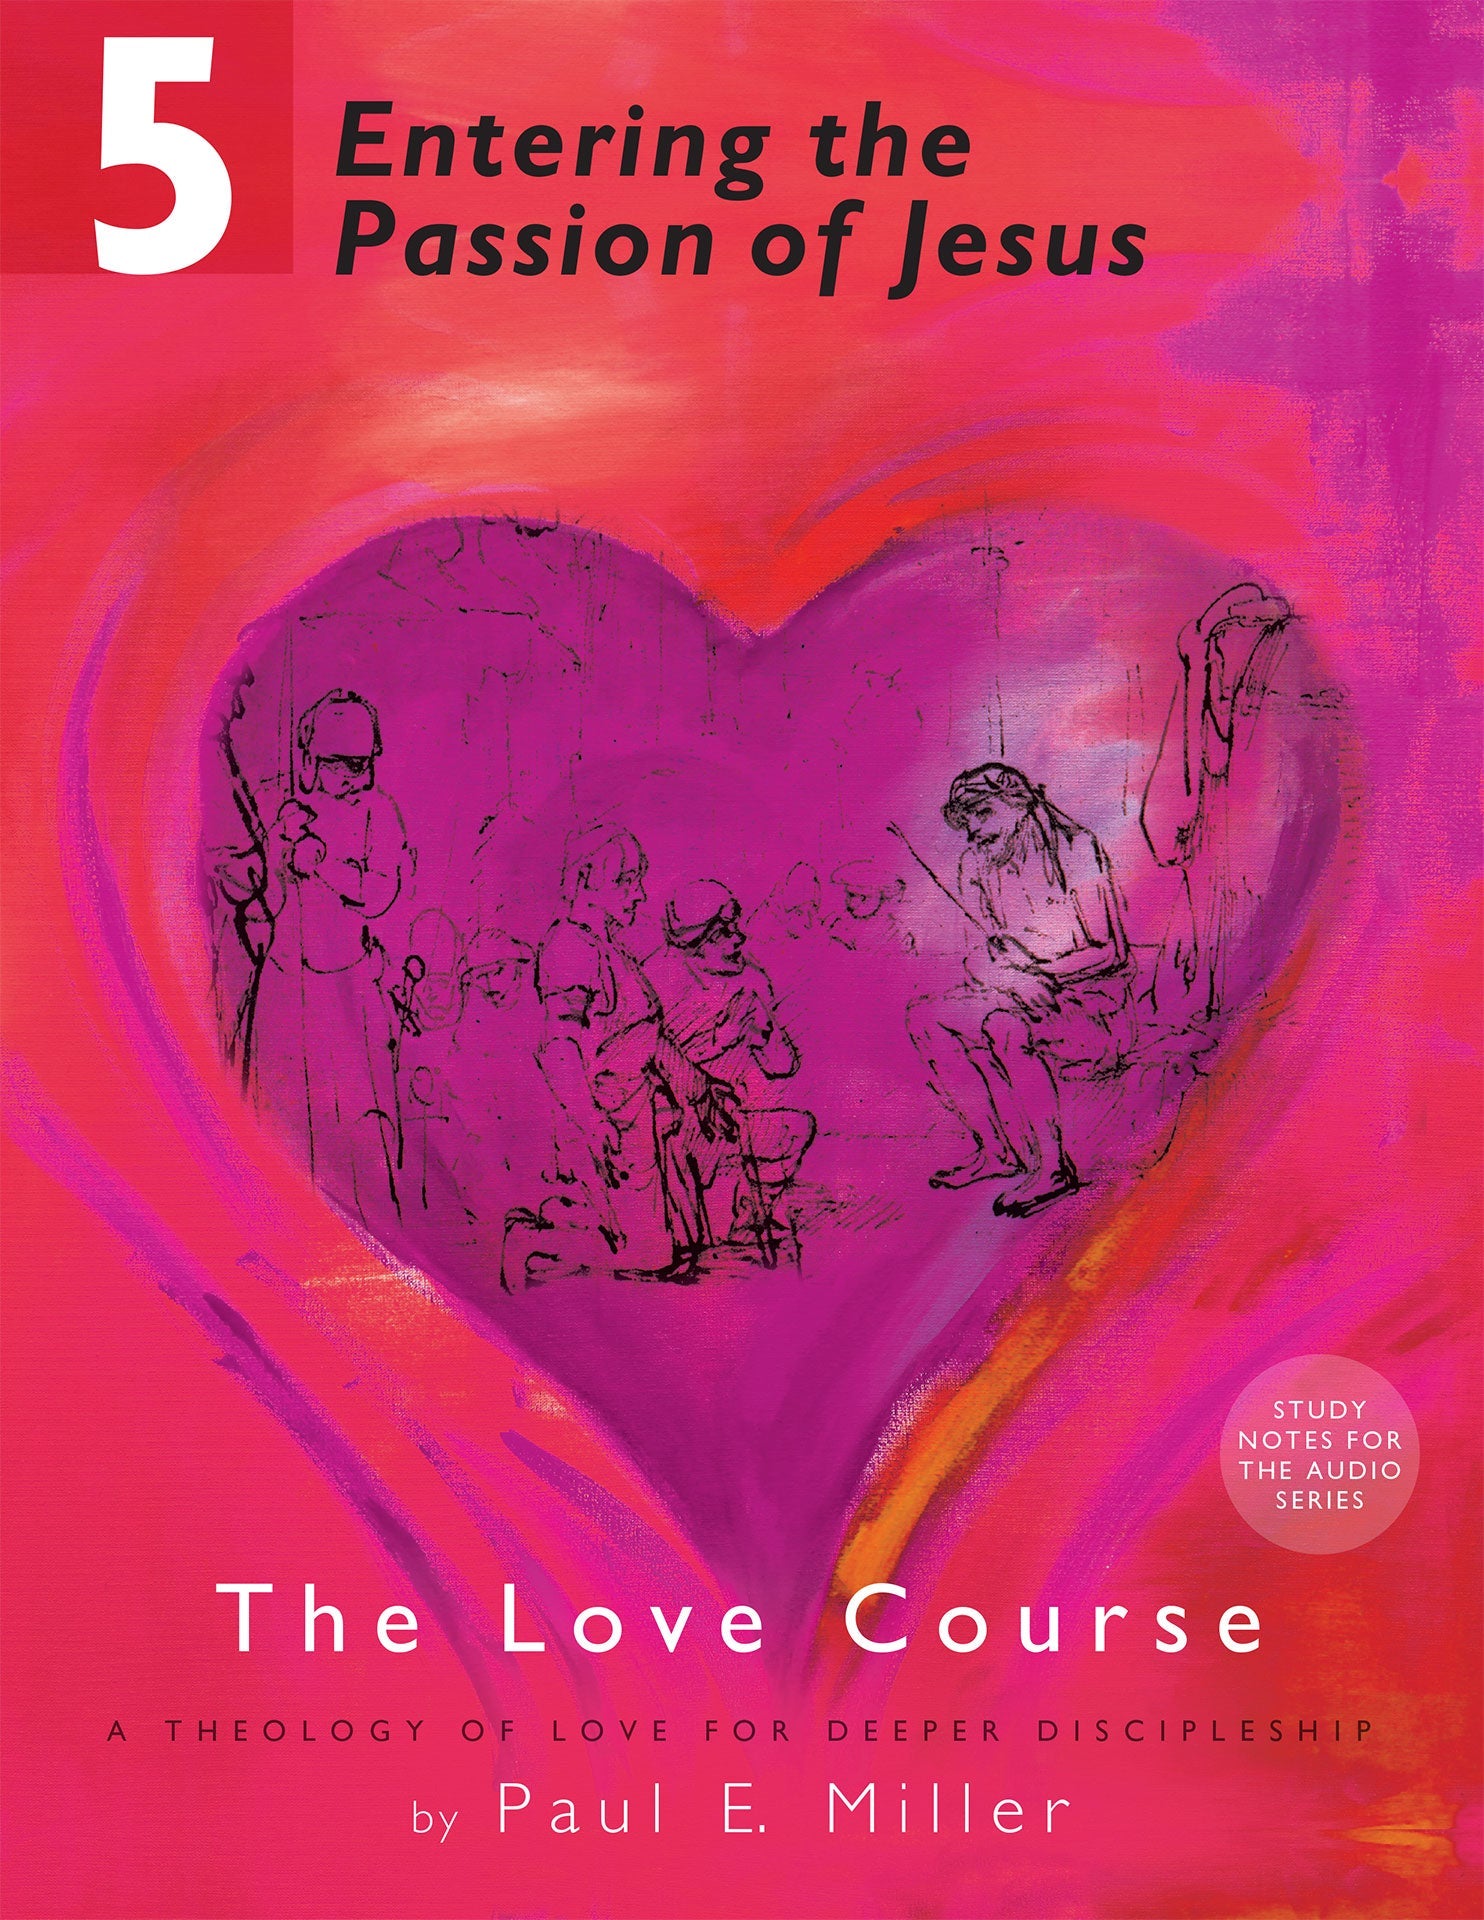 The Love Course, Unit 5: Entering the Passion of Jesus Manual